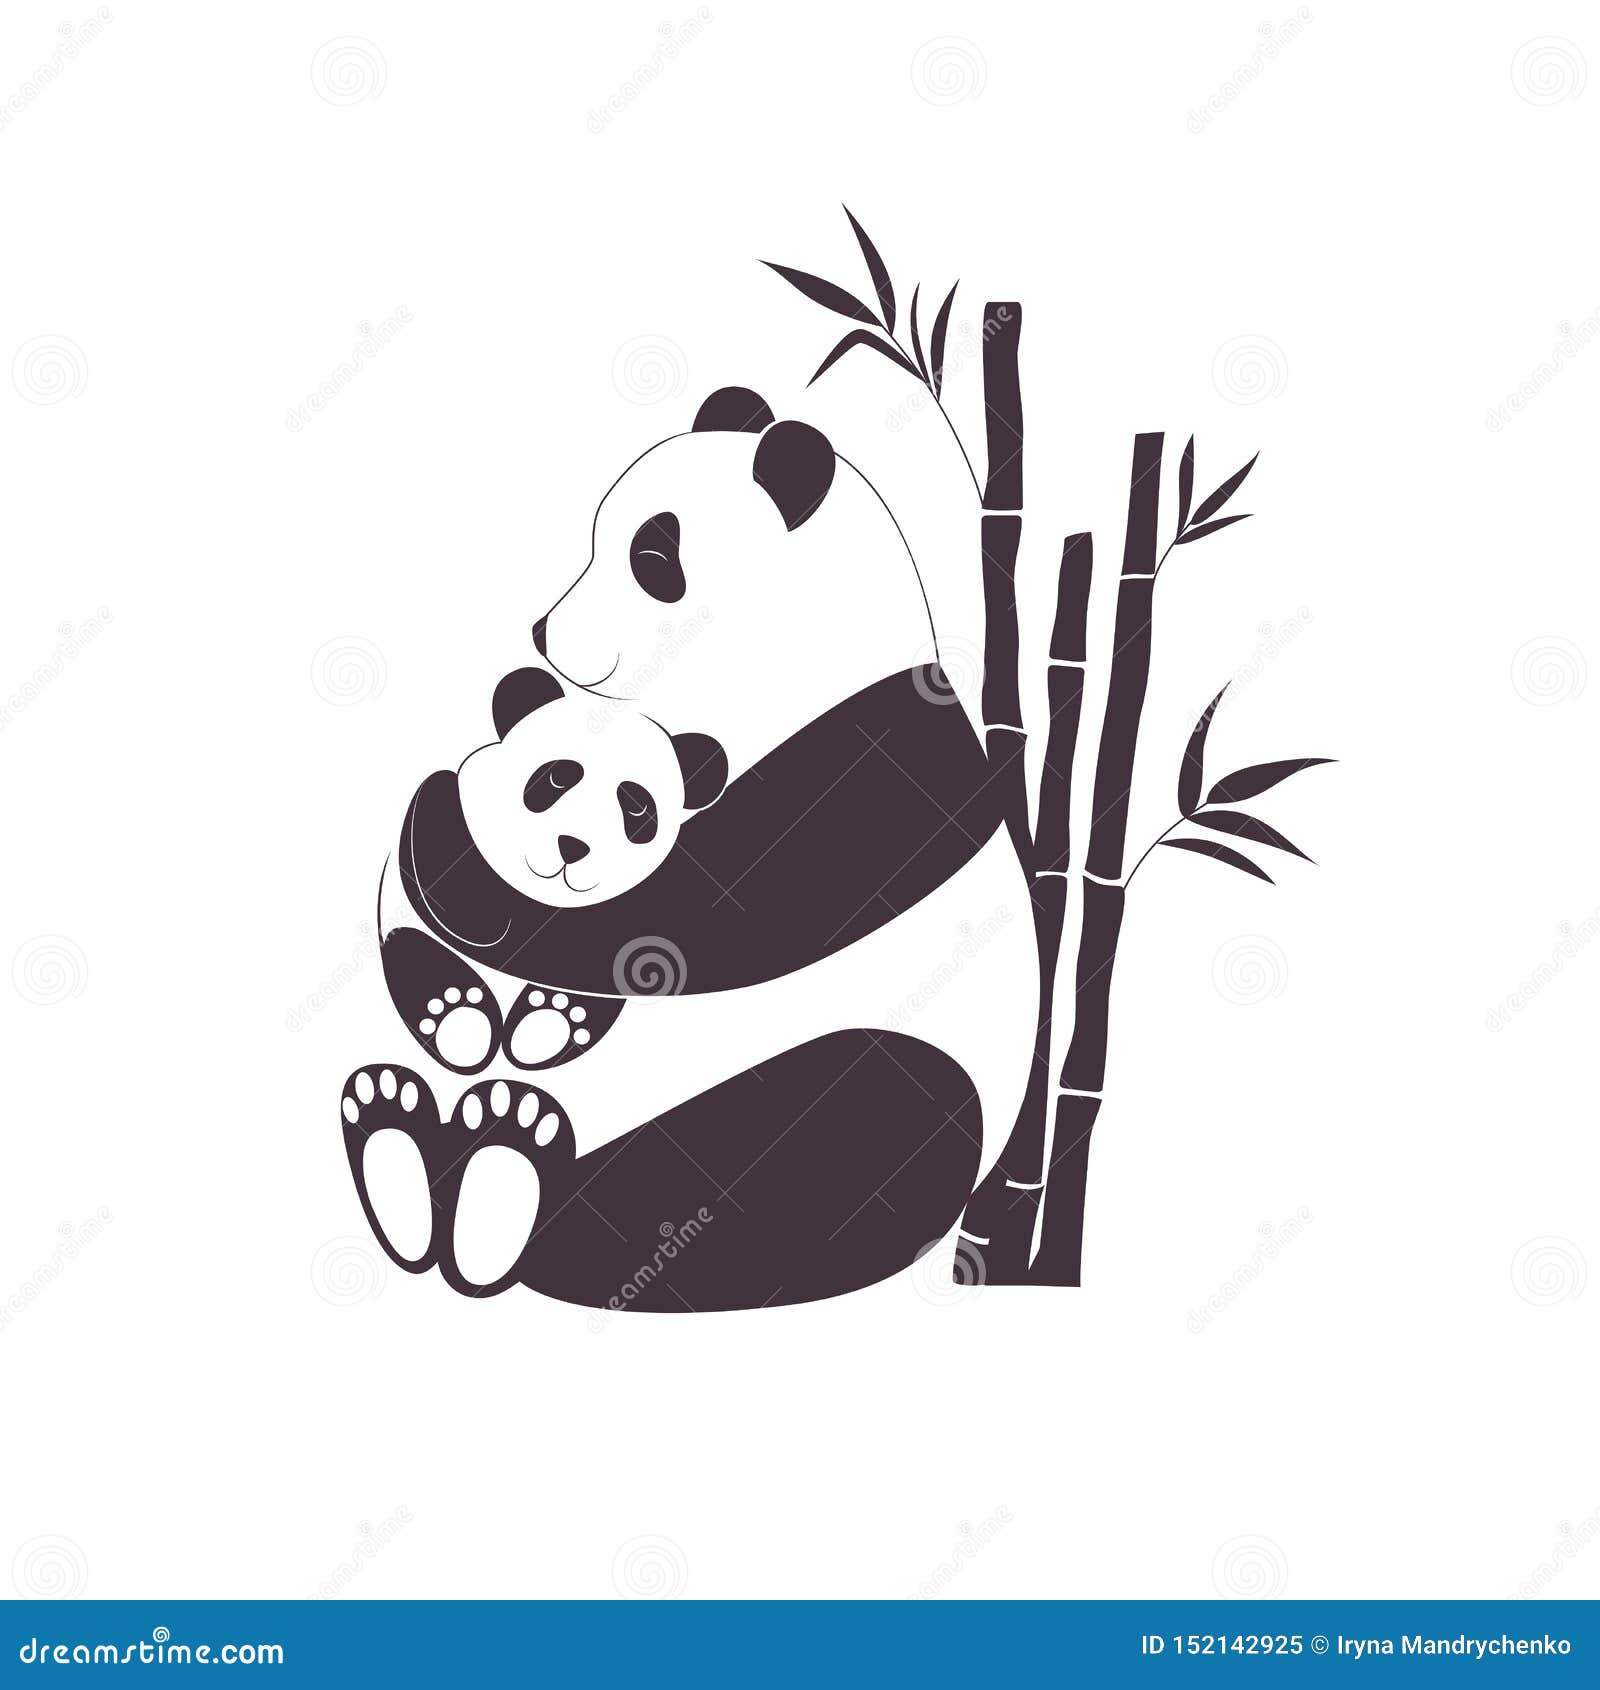 Panda Mother Hugging Baby Panda Love Between Mom And Her Child Caring And Nursery Concept Stock Vector Illustration Of Card Happiness